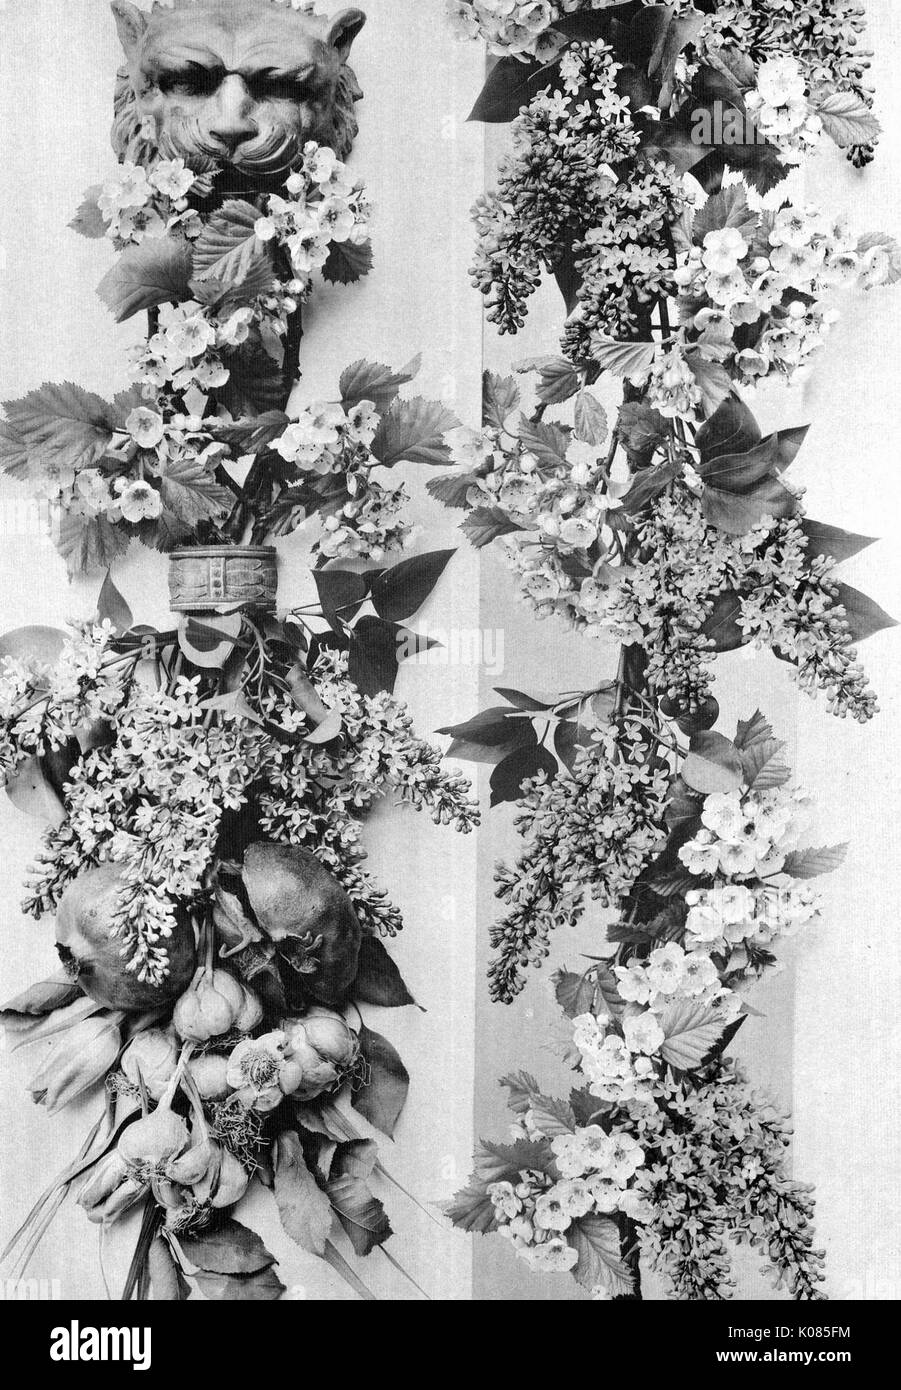 Two floral decorations with lion head on top carrying my project, fruits in image including of pomegranates and garlic, 1900. Stock Photo